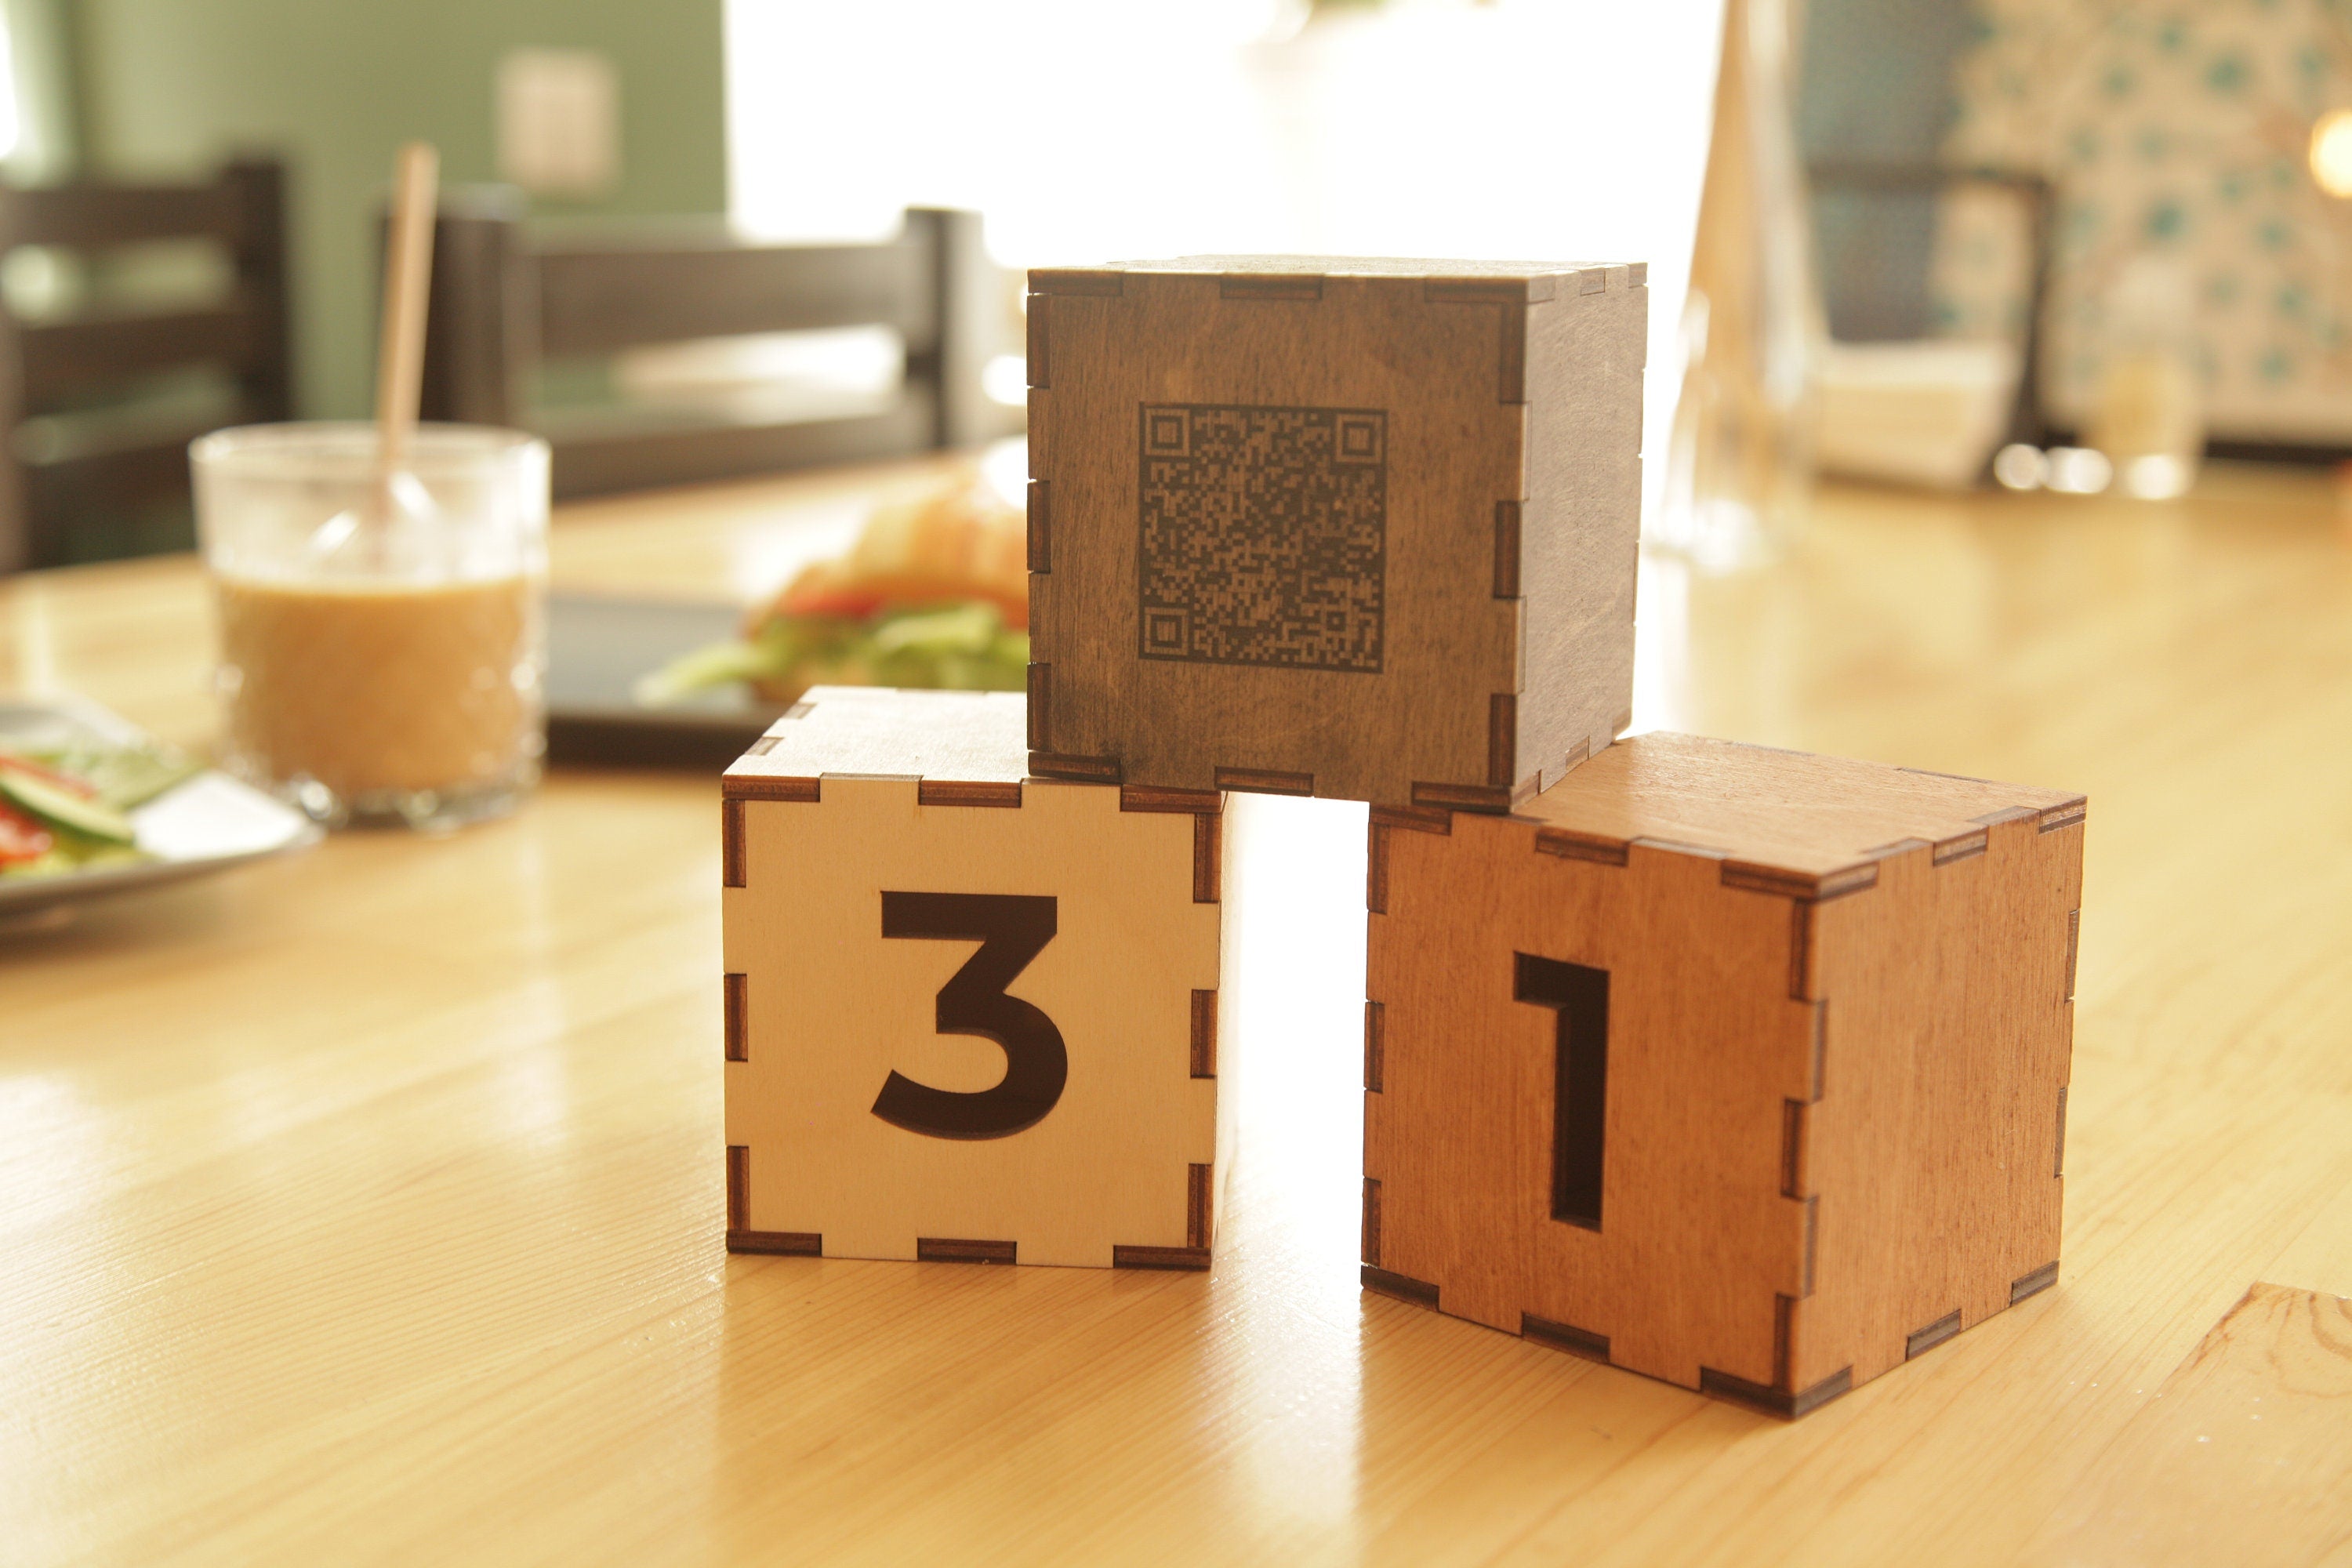 Wooden cube with the number and qr-code